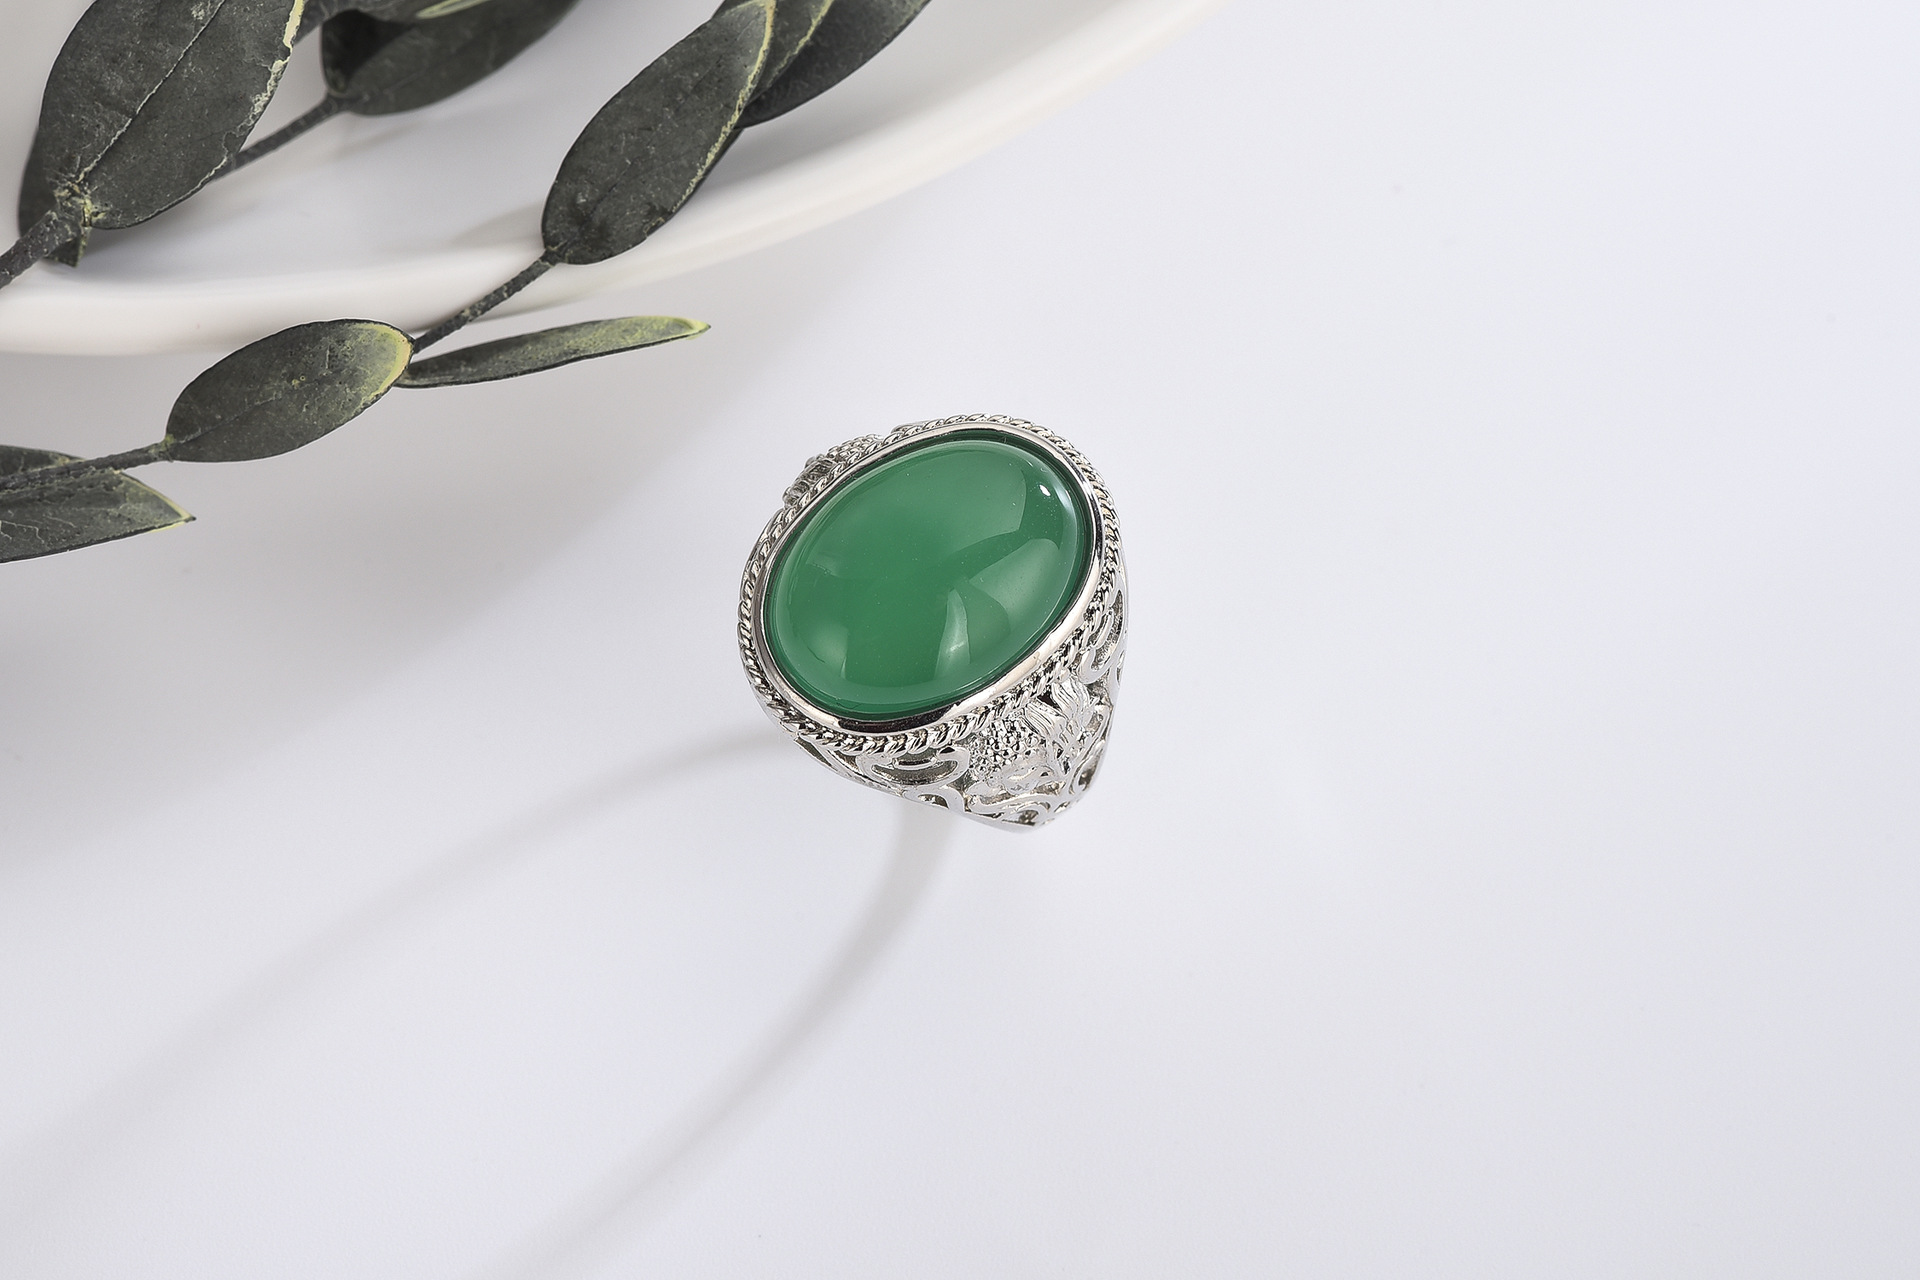 13x18mm ring (including chrysoprase) with adjustab